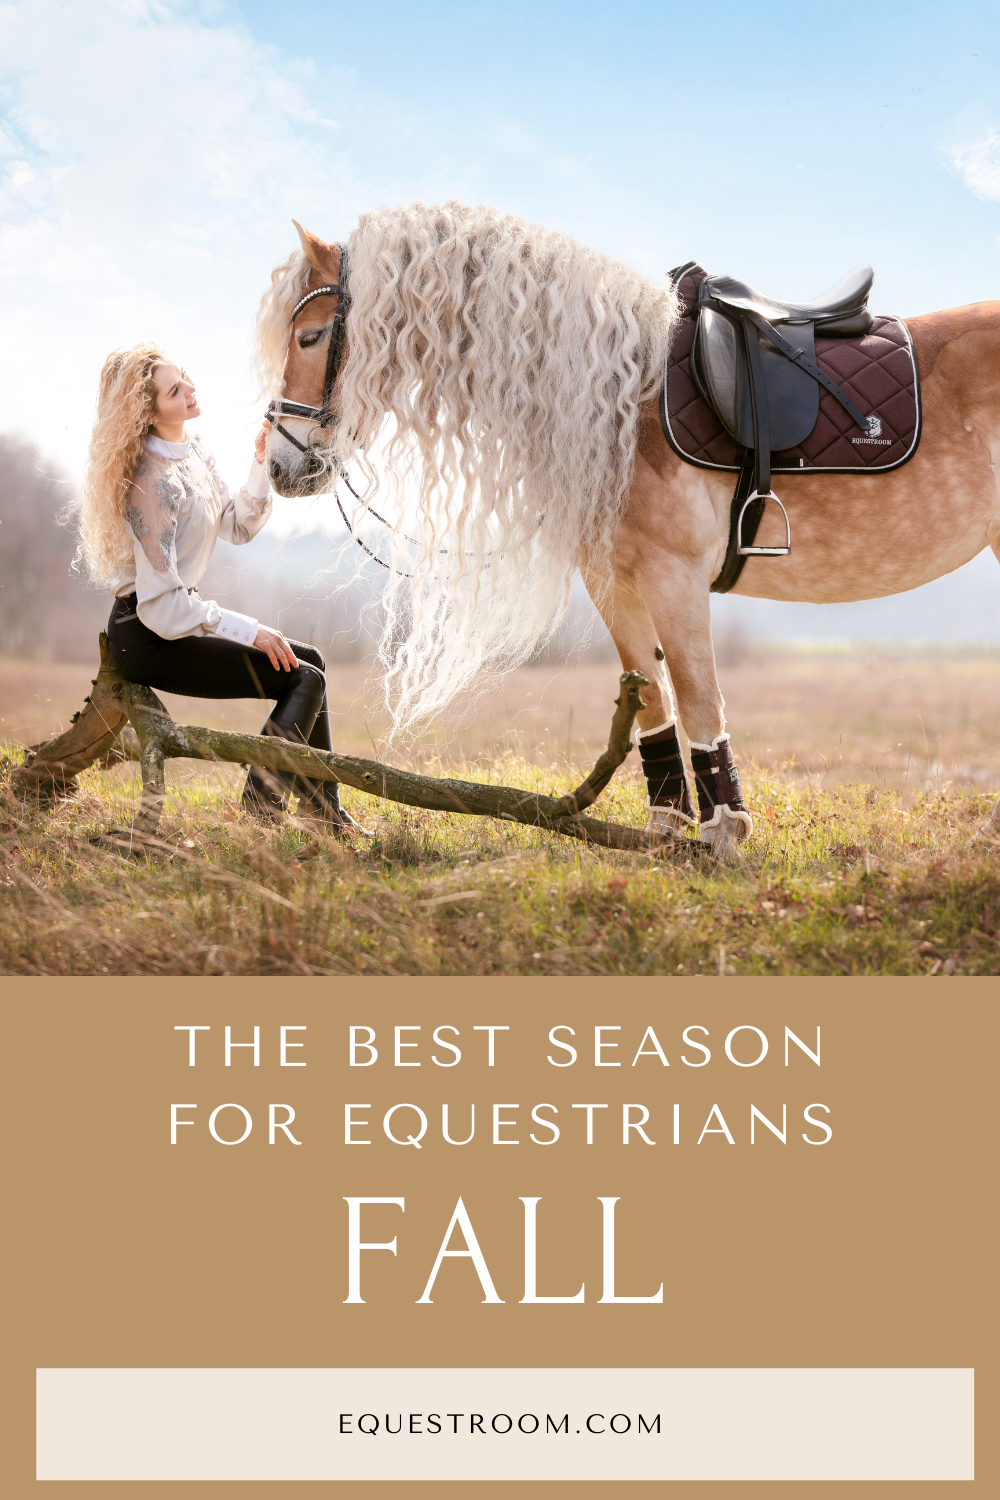 FALL, THE BEST SEASON FOR EQUESTRIANS